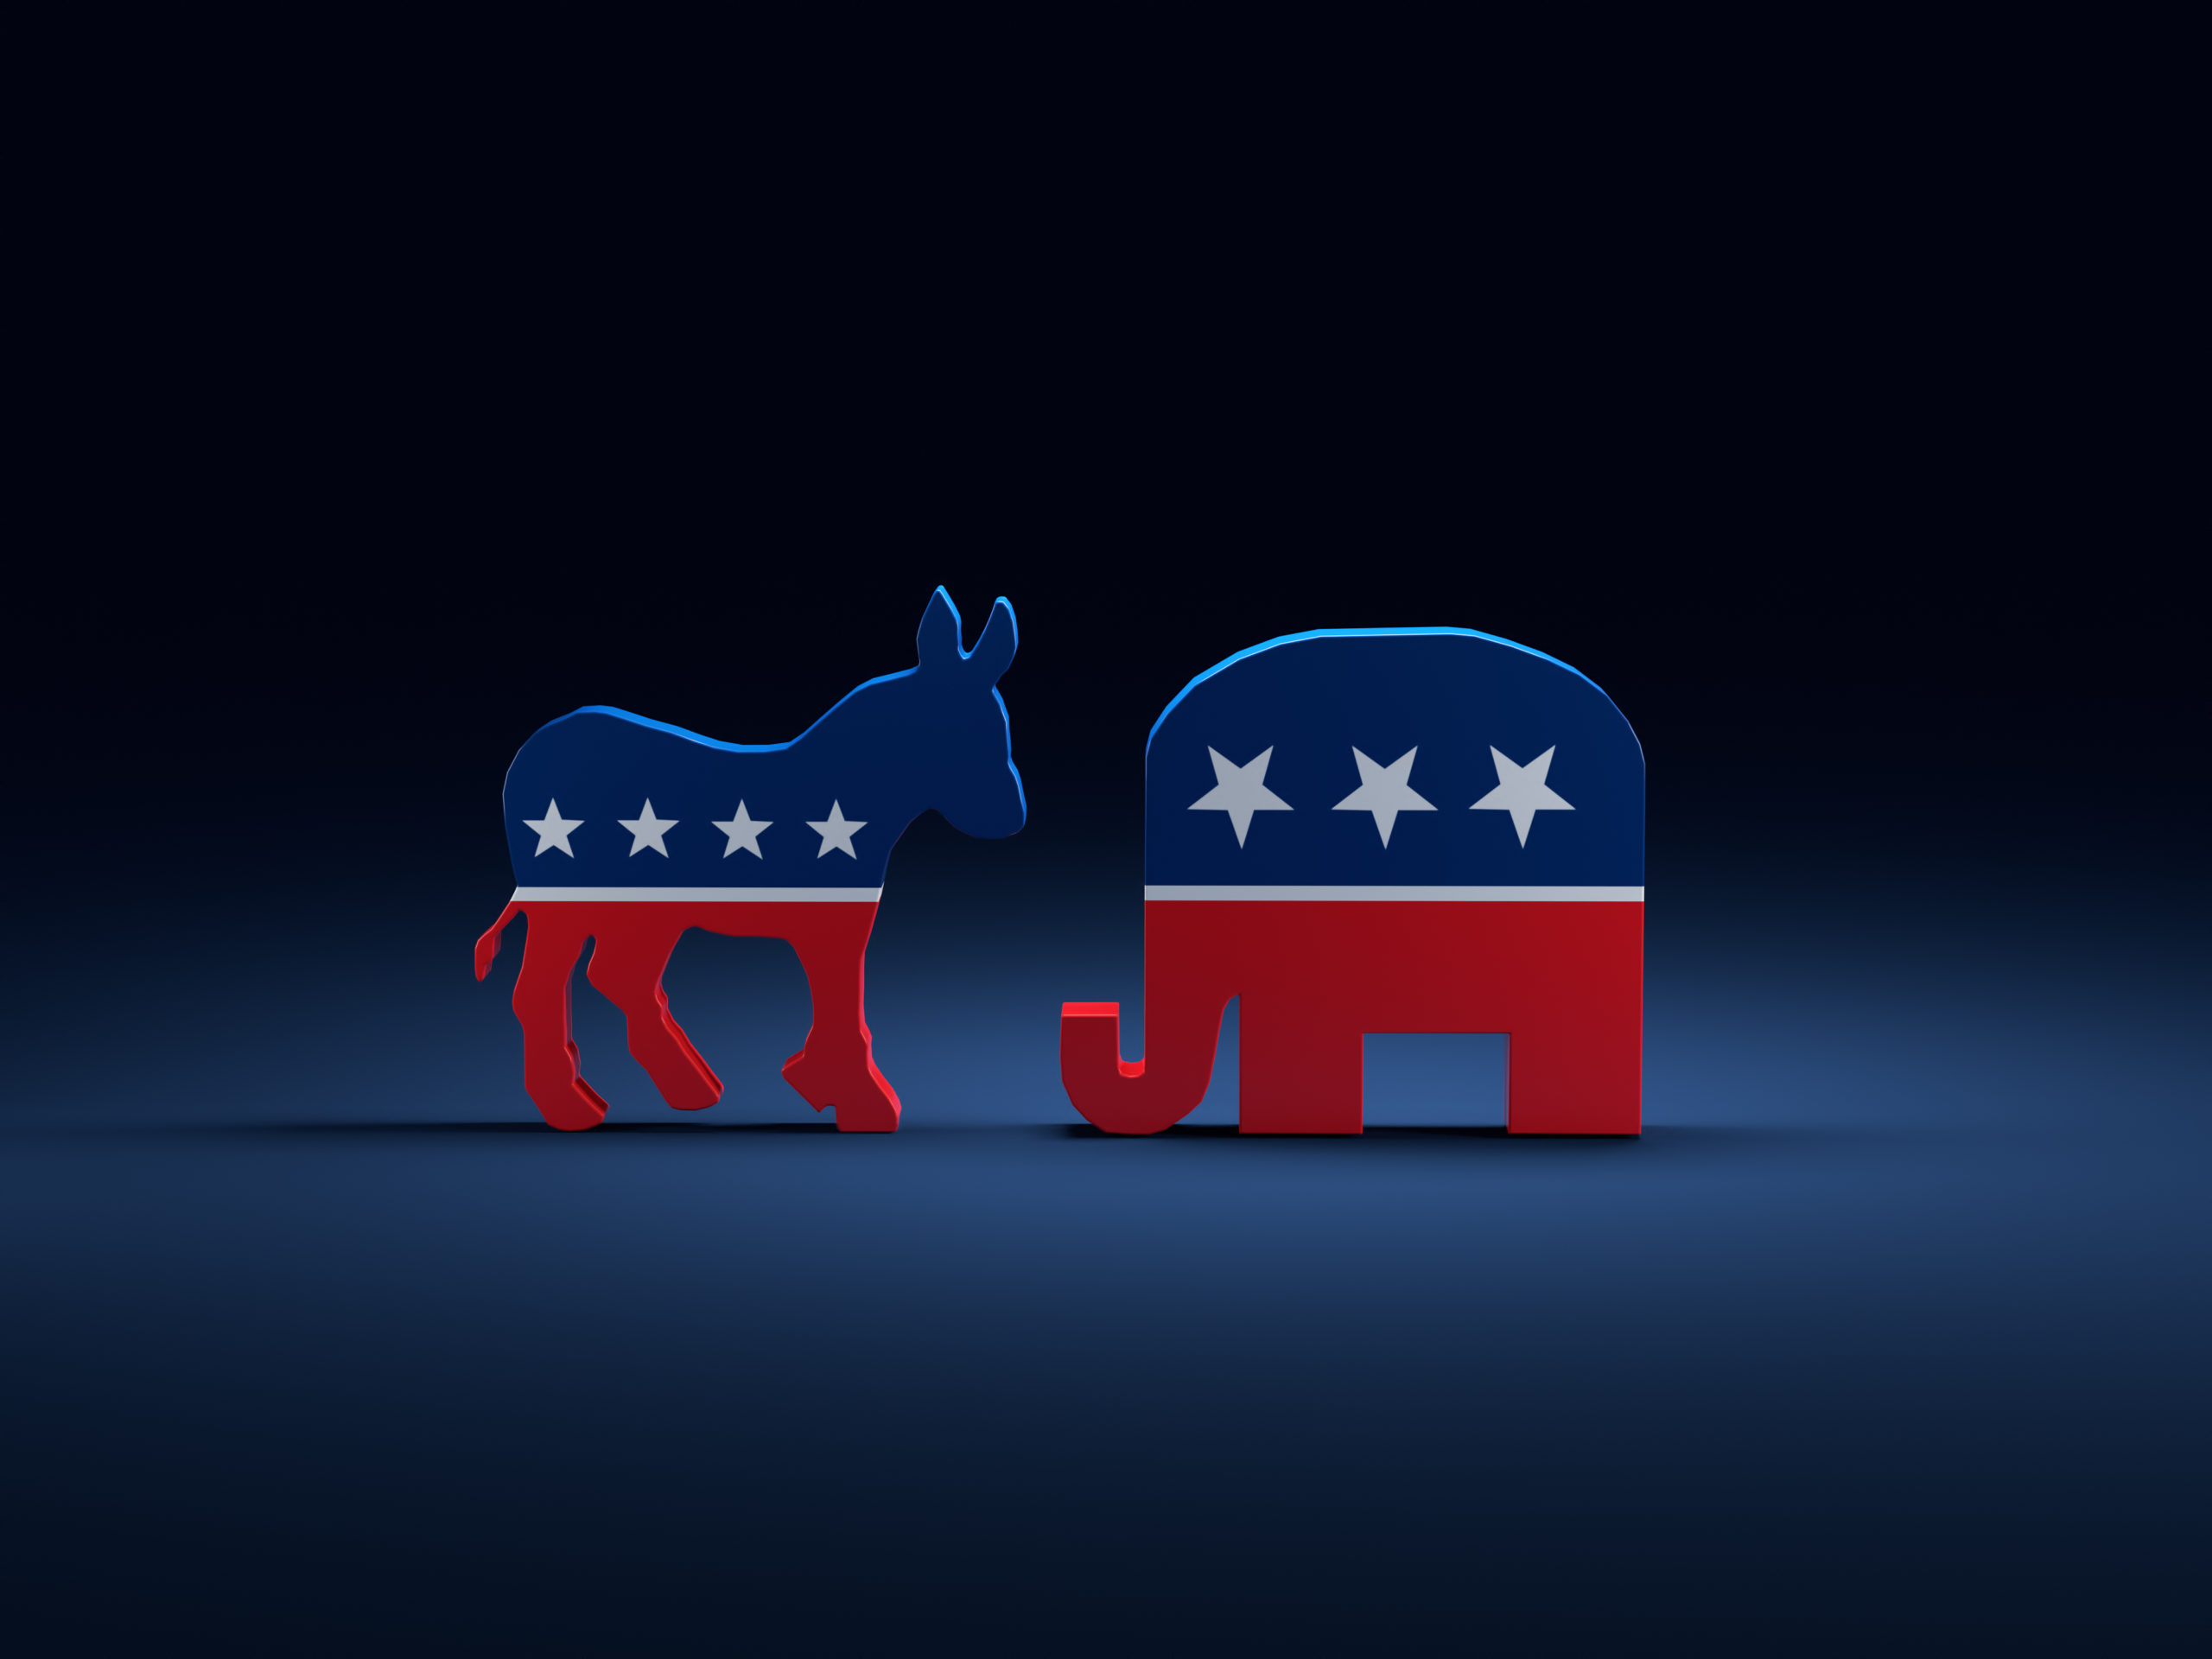 How to Break the Two-Party System